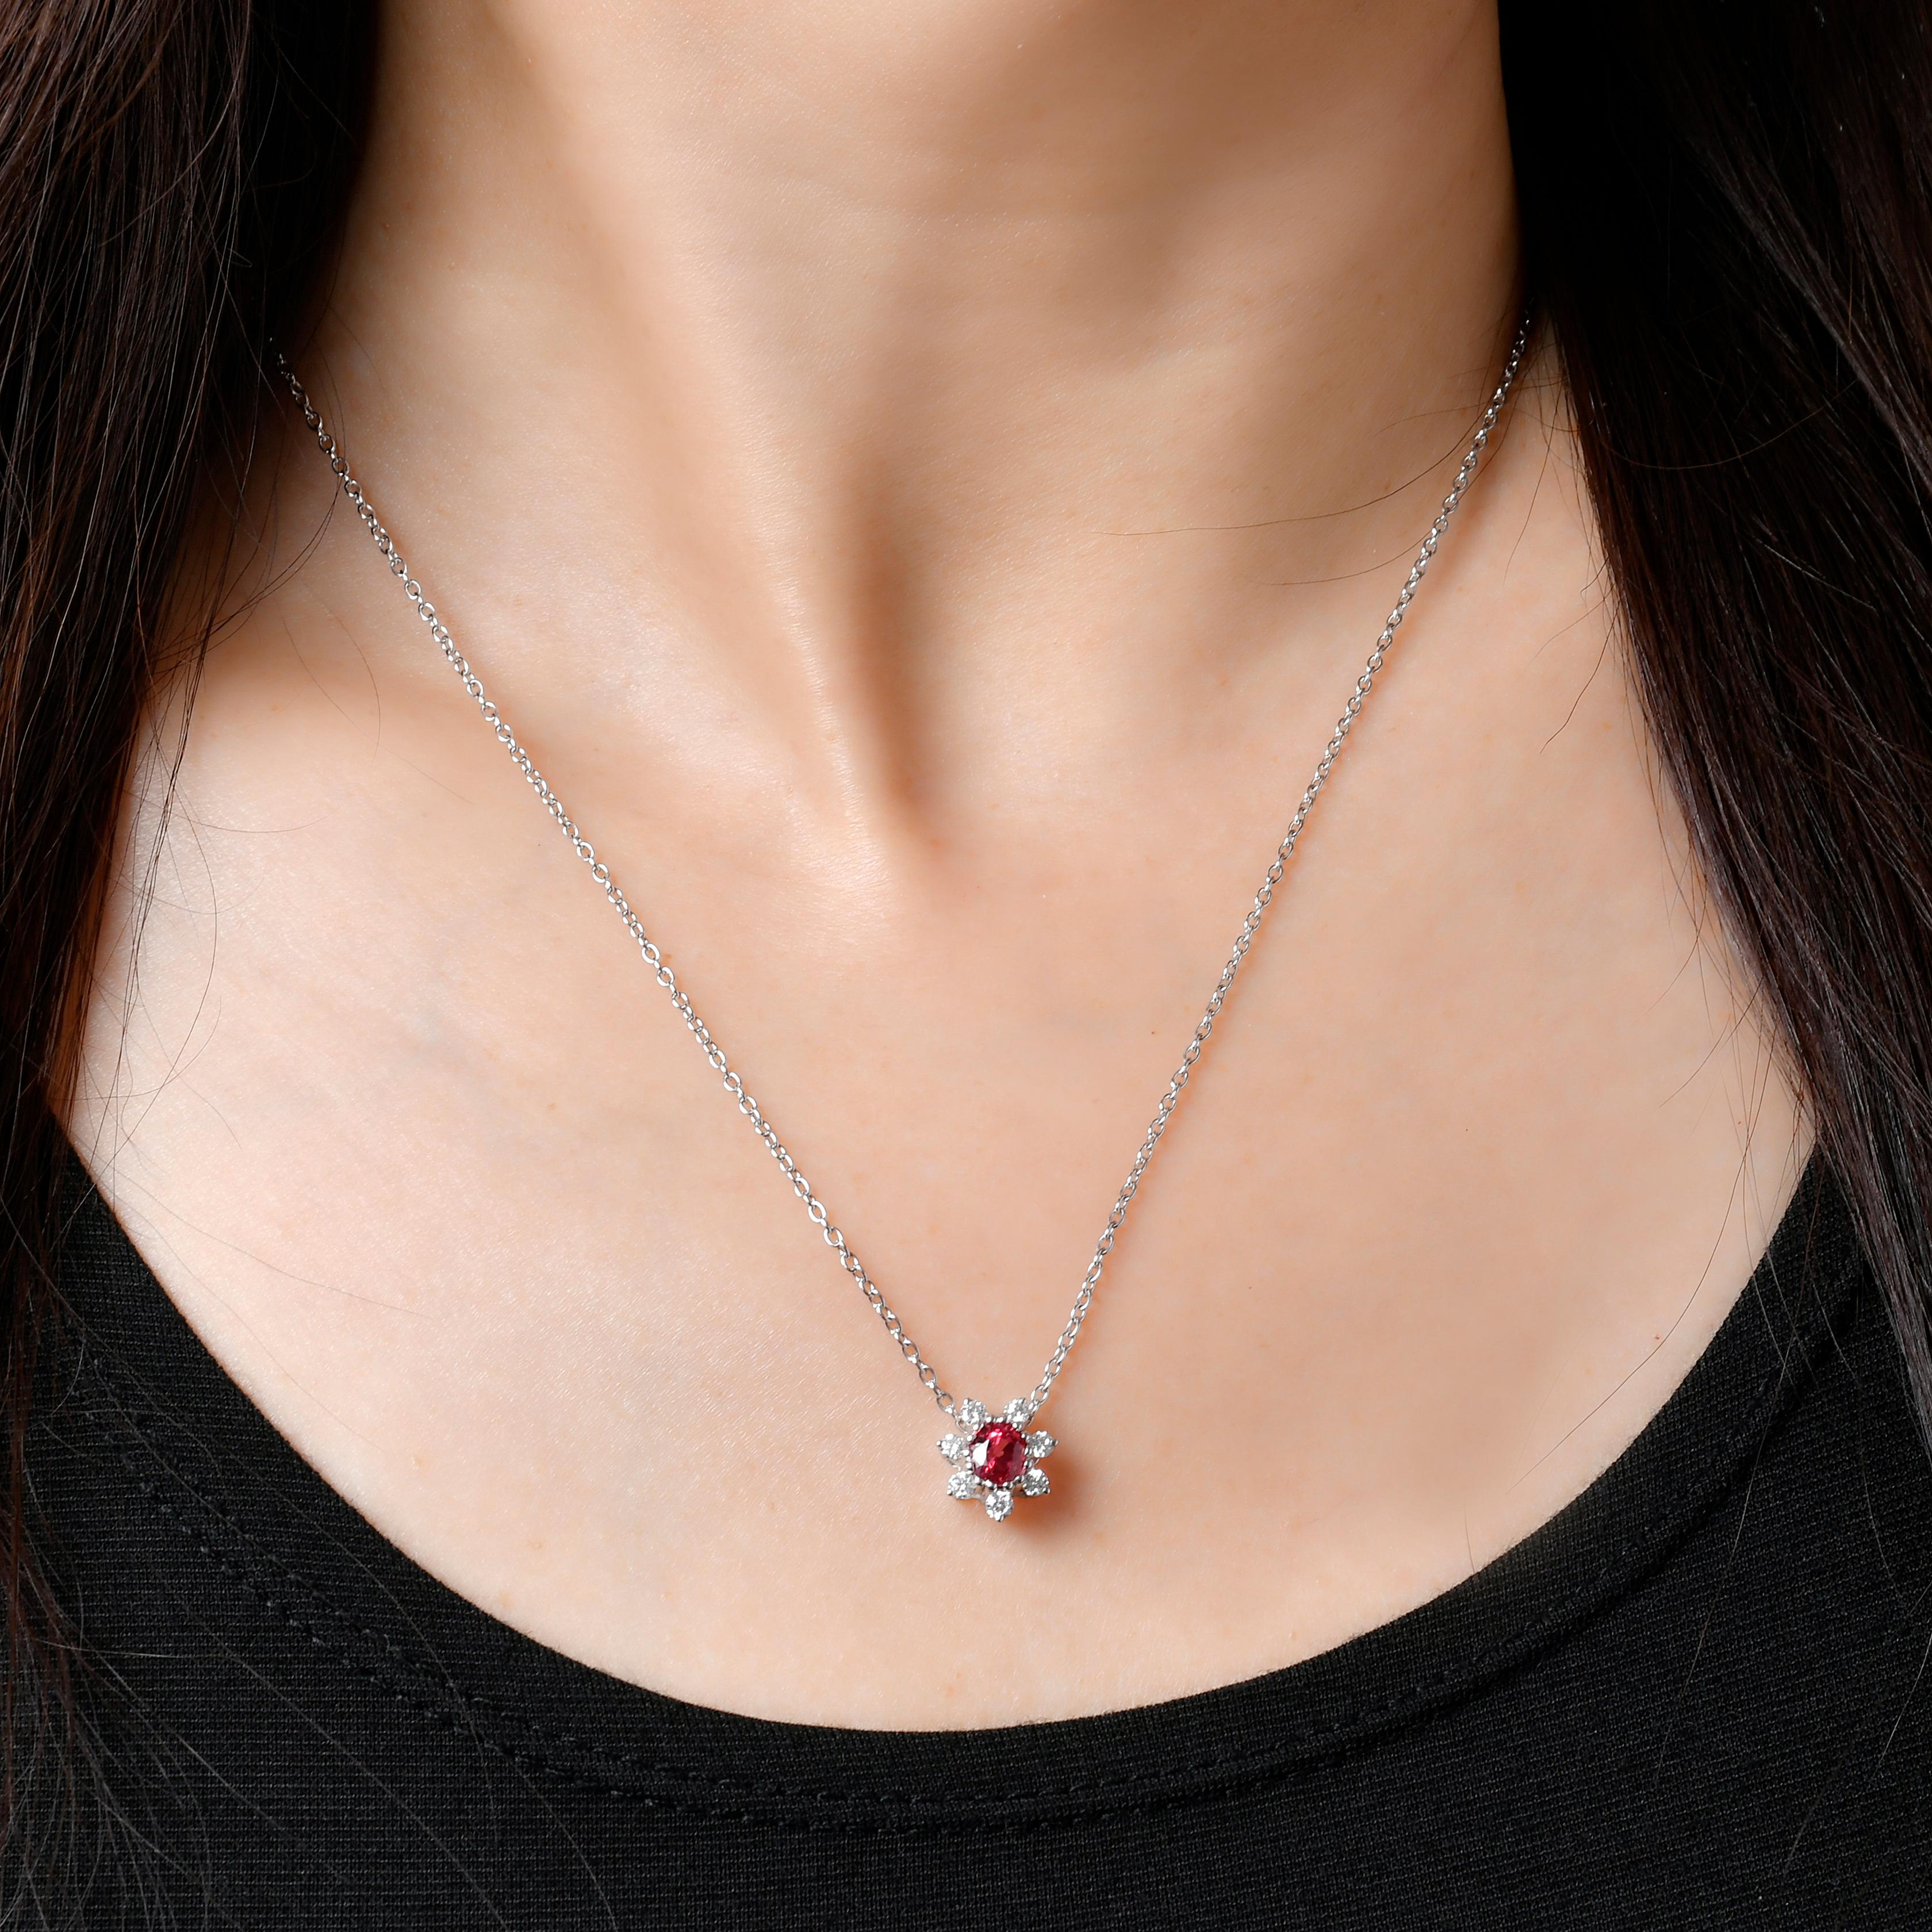 Indulge in luxury with our Spinel and Diamond Pendant. Handcrafted with 18K white gold, this pendant showcases a stunning raspberry spinel surrounded by sparkling VS diamonds. Elevate your style with this high-quality jewelry piece. The chain length